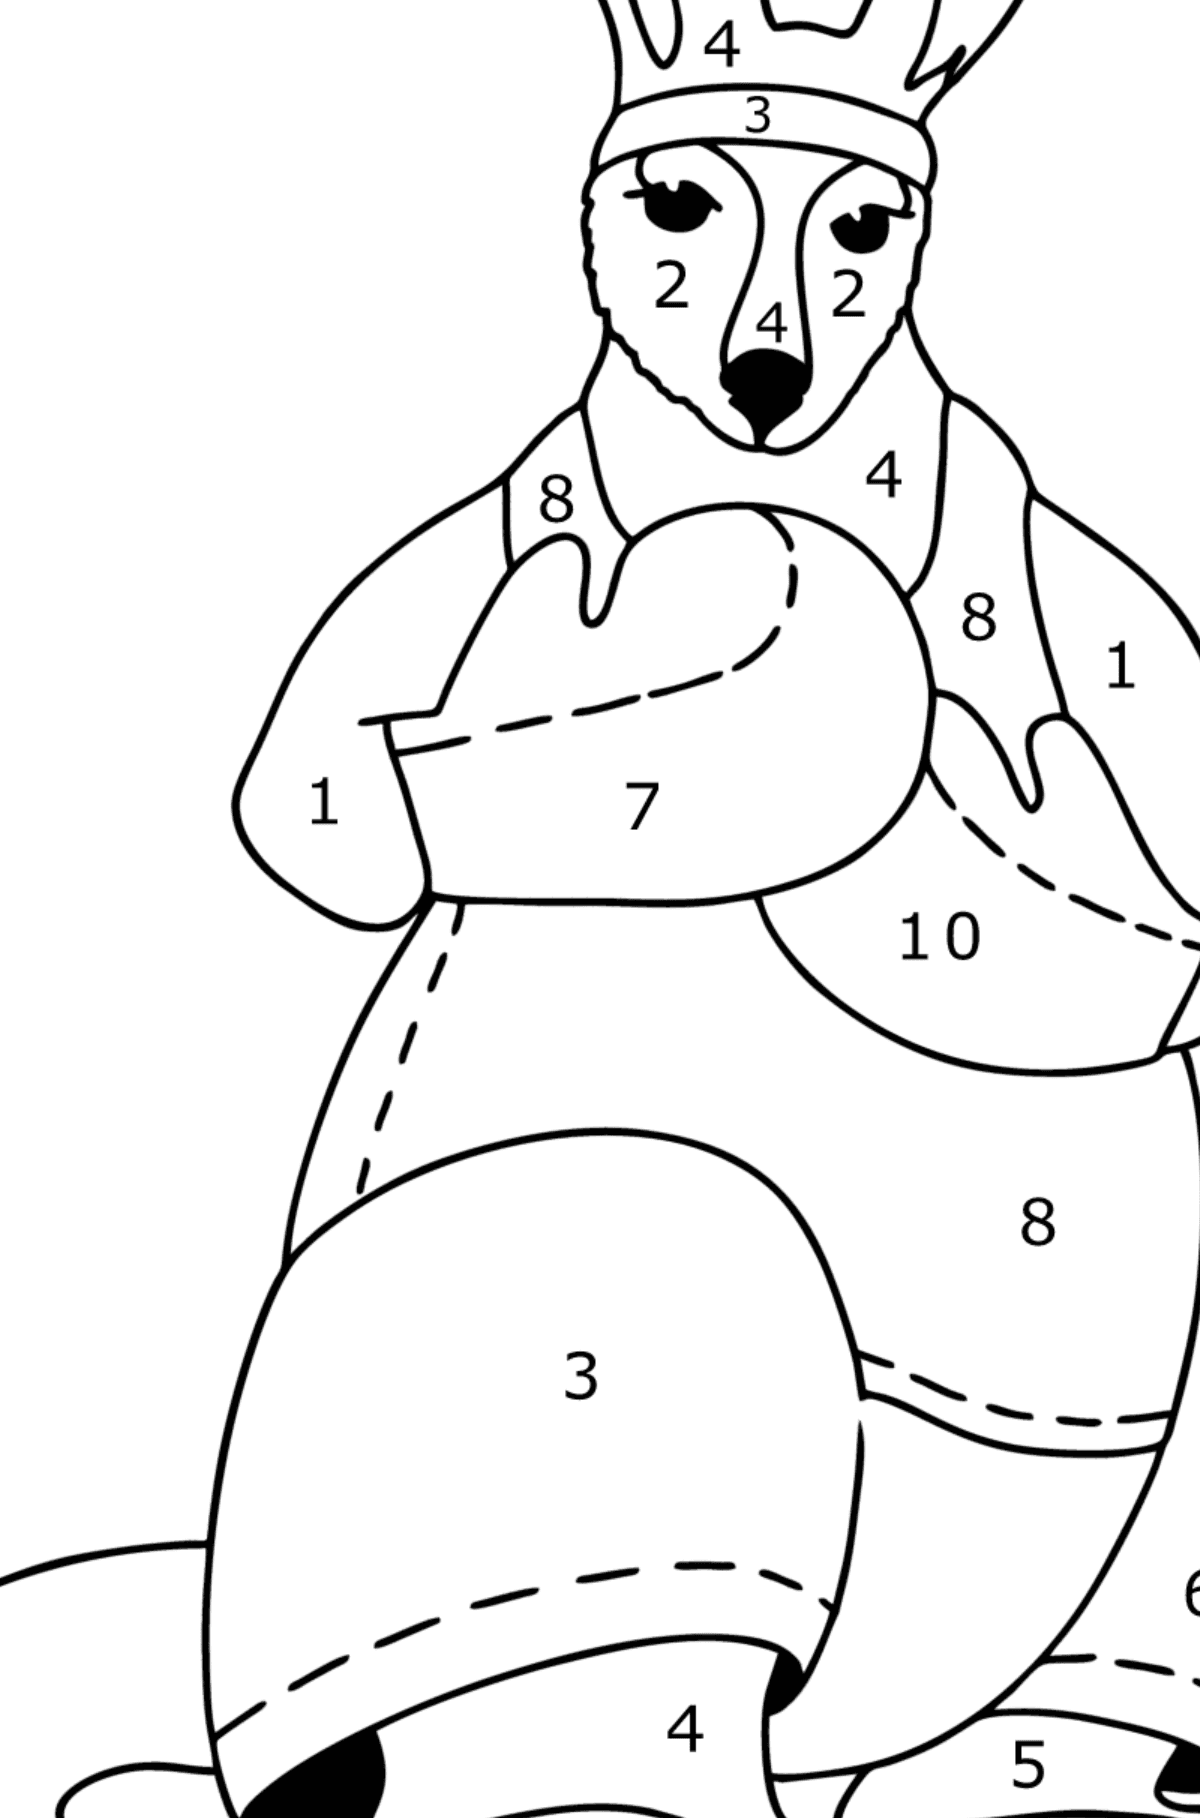 Kangaroo Boxer coloring page - Coloring by Numbers for Kids